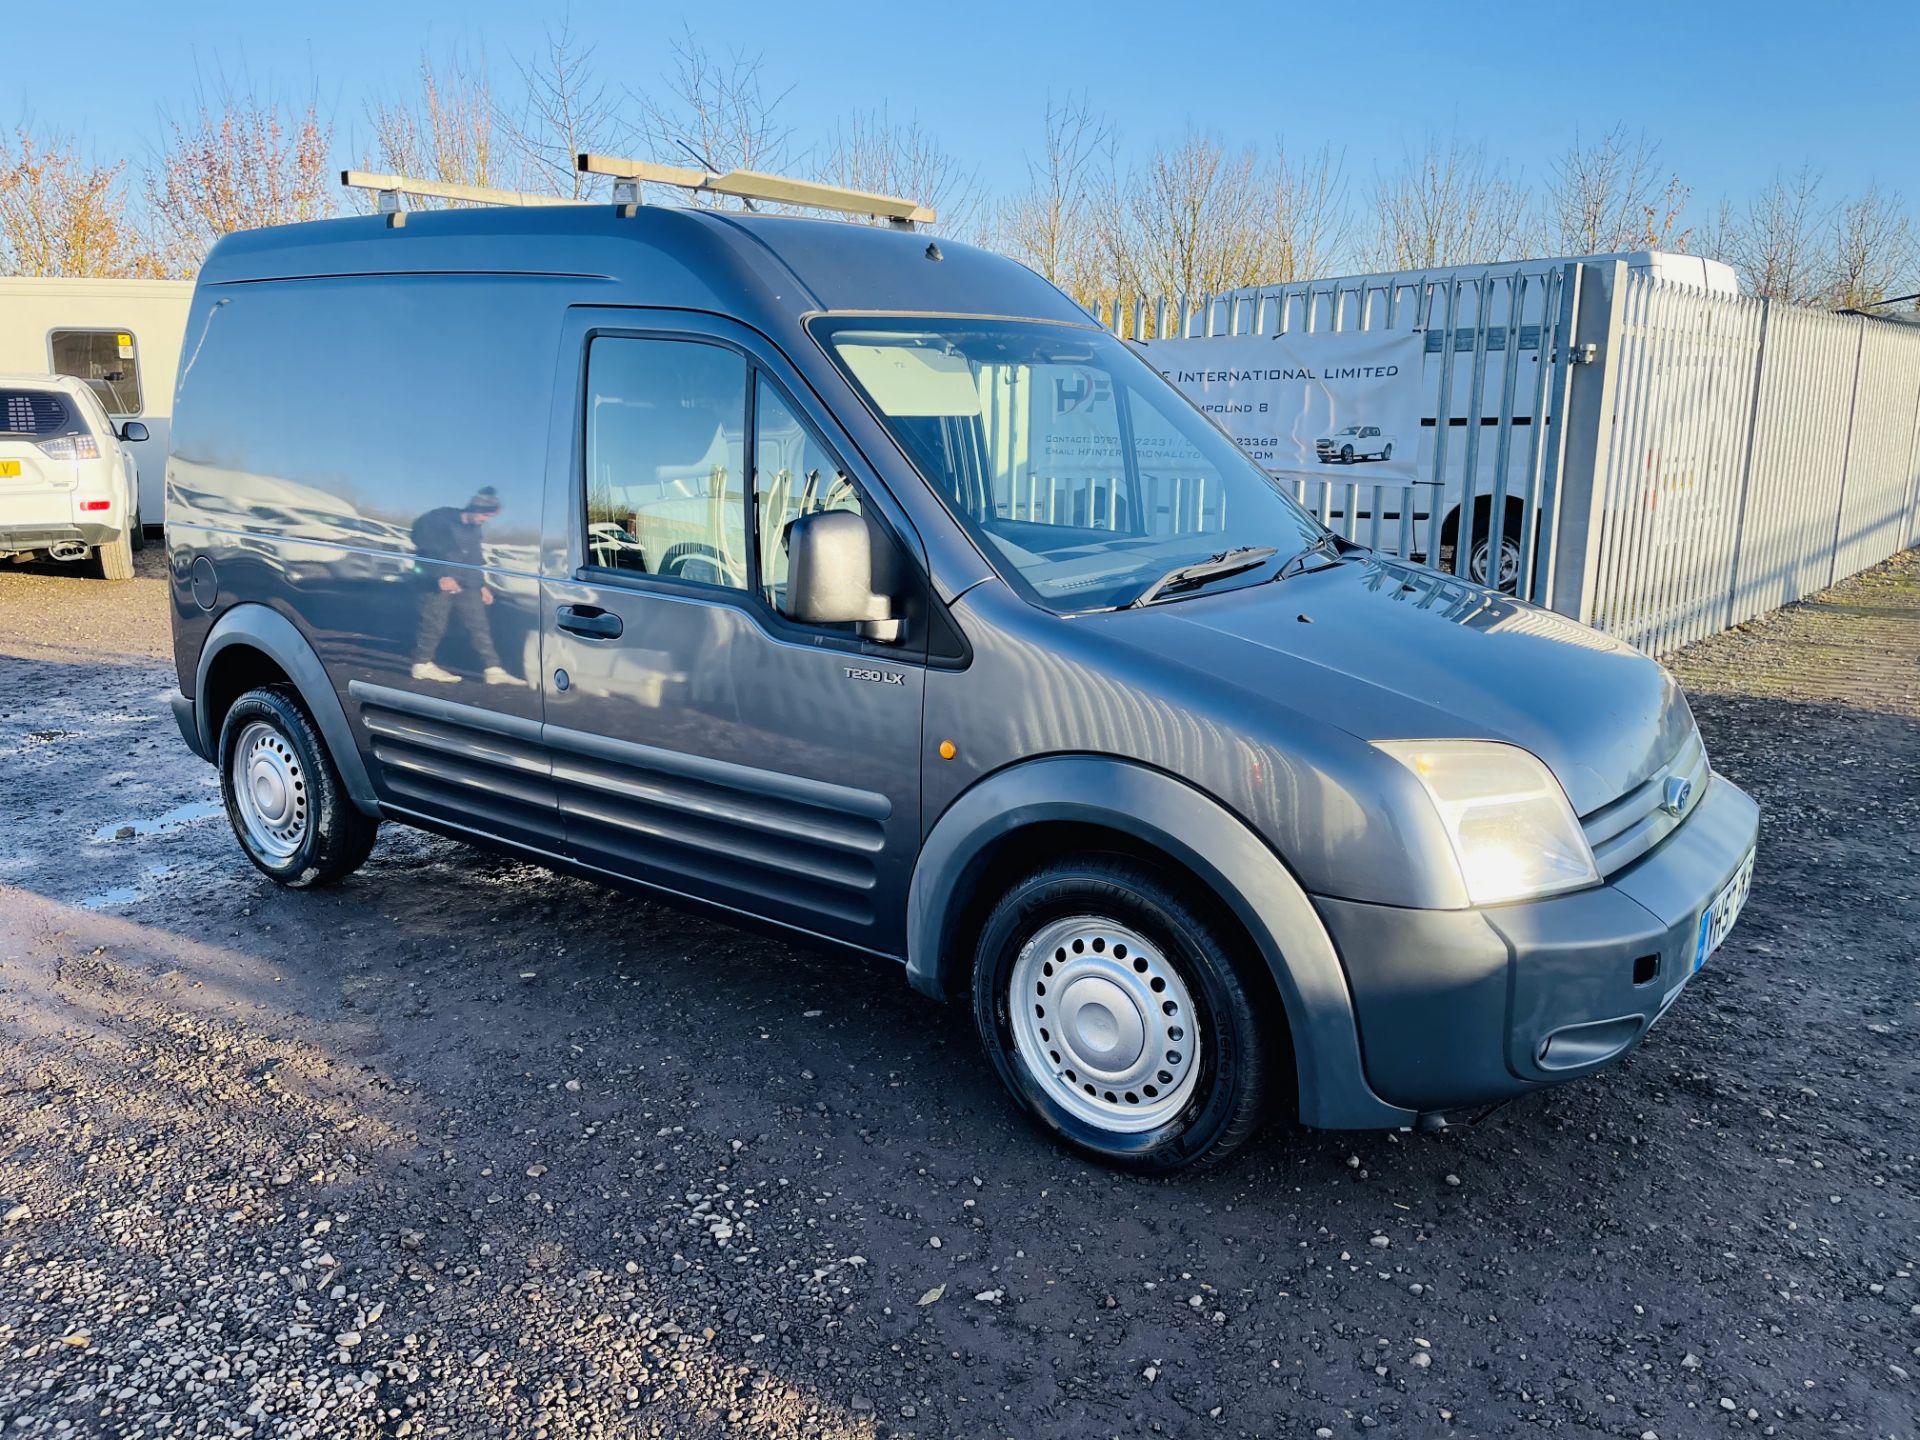 Ford Transit Connect 1.8 TDCI T230 LX110 LWB High Roof 2007 '57 Reg' A/C - No vat save 20% - Image 16 of 20